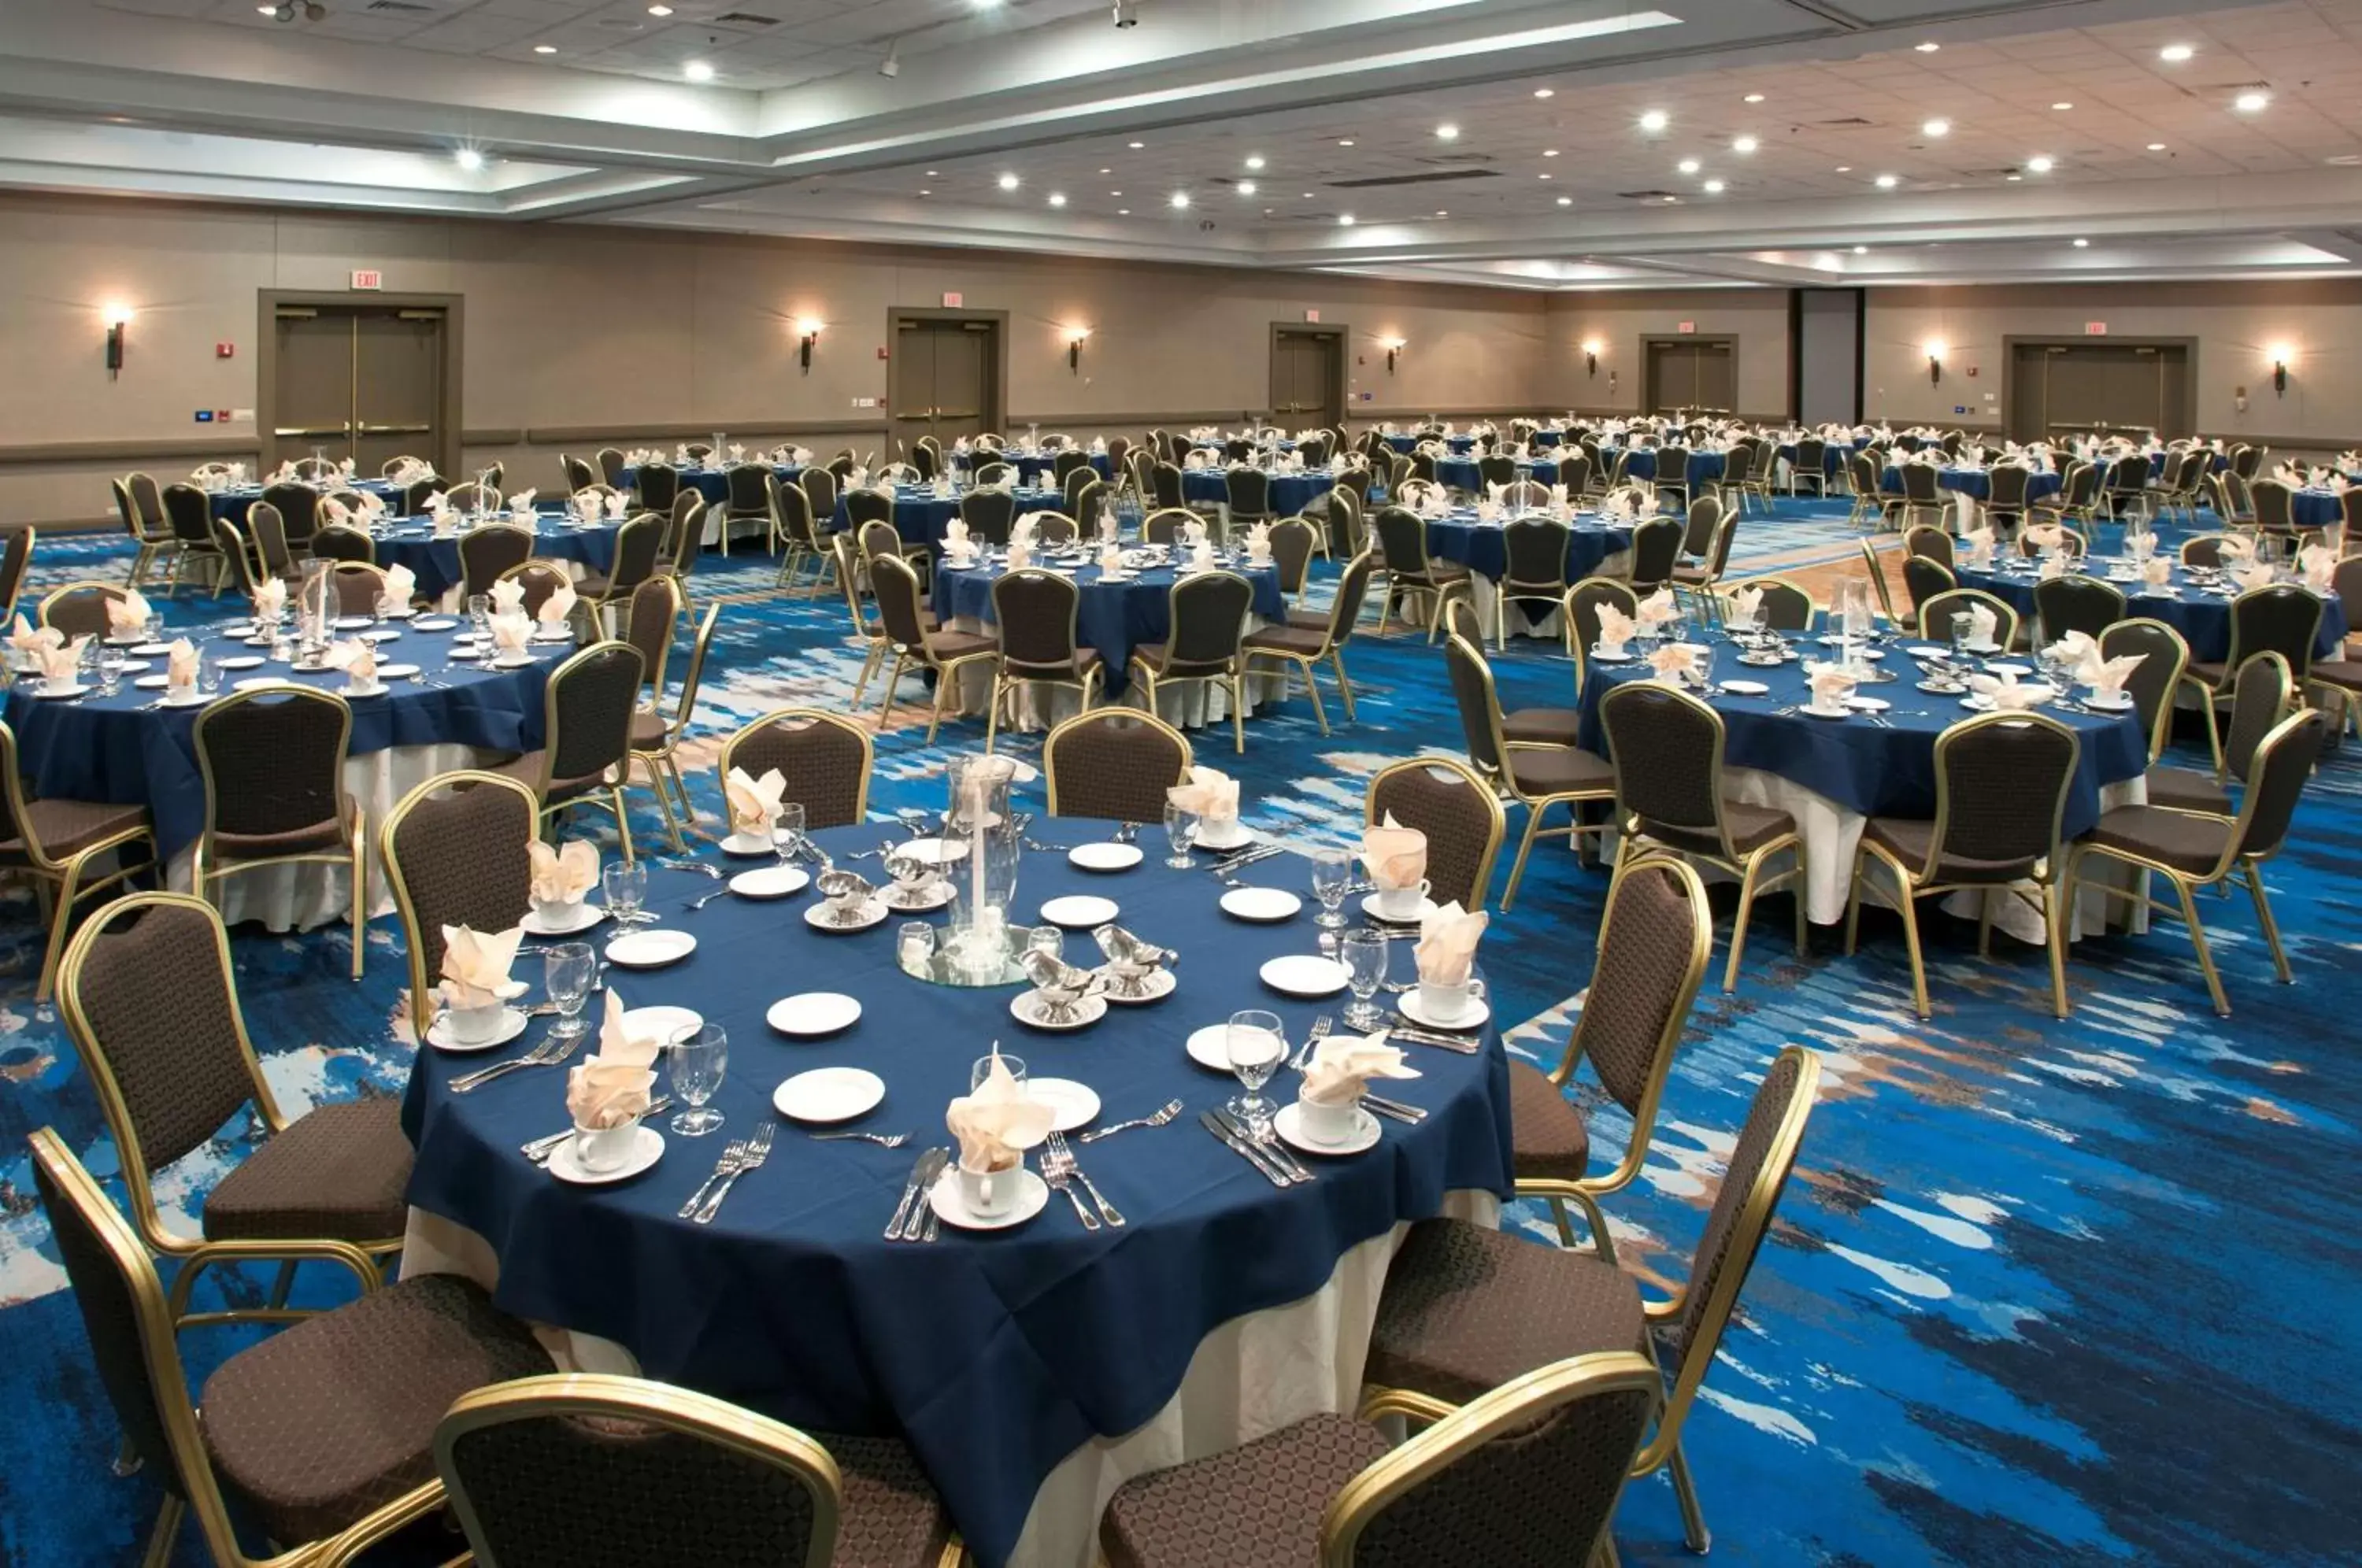 On site, Banquet Facilities in Radisson Hotel & Conference Center Green Bay